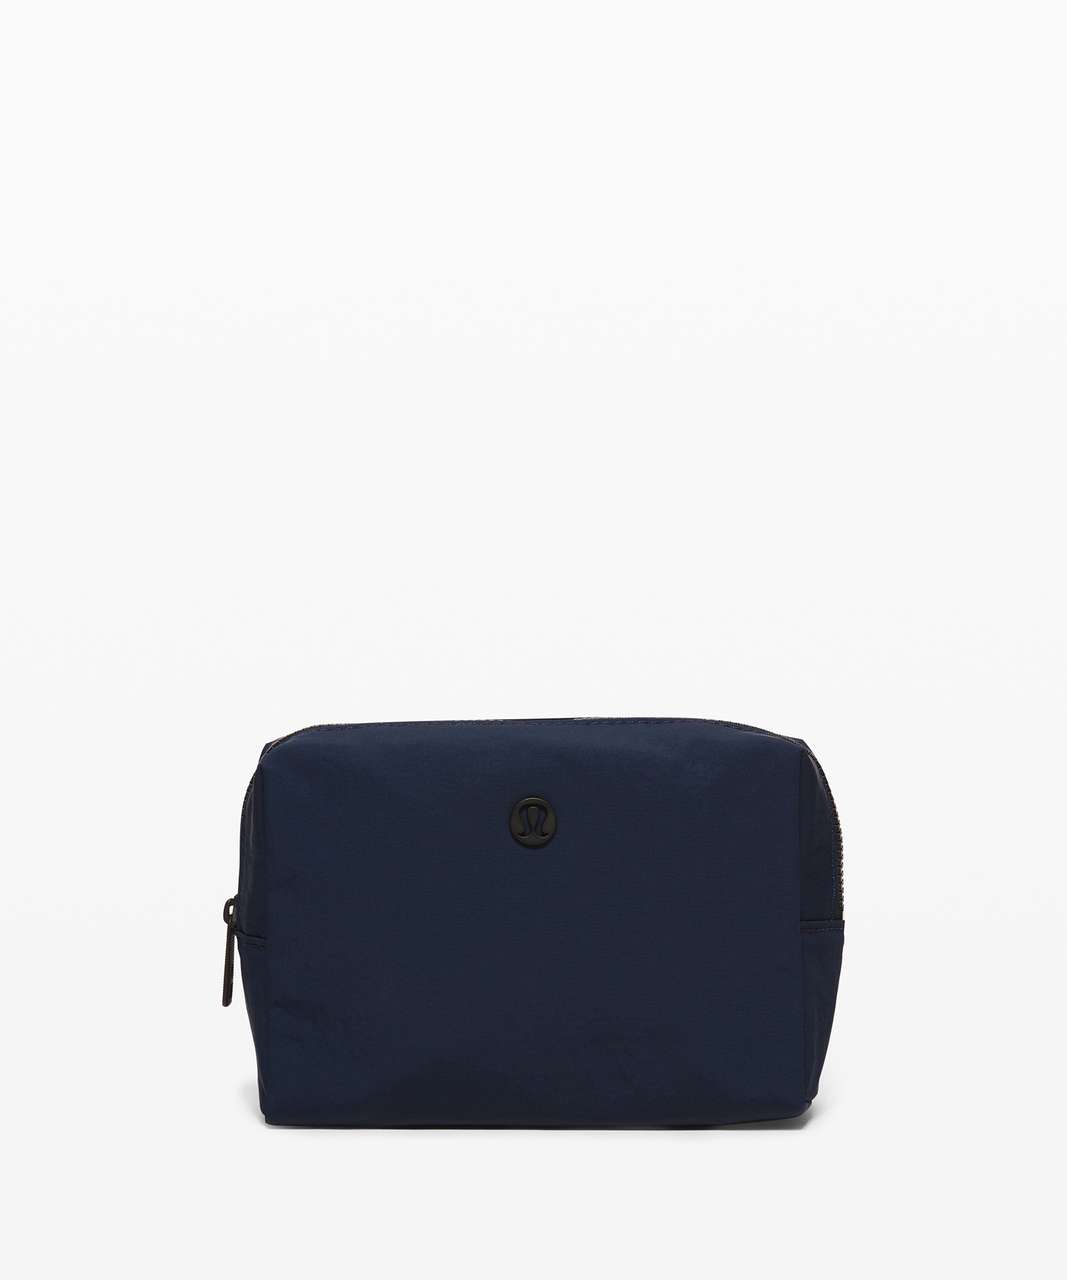 Lululemon All Your Small Things Pouch *Mini 2L - True Navy